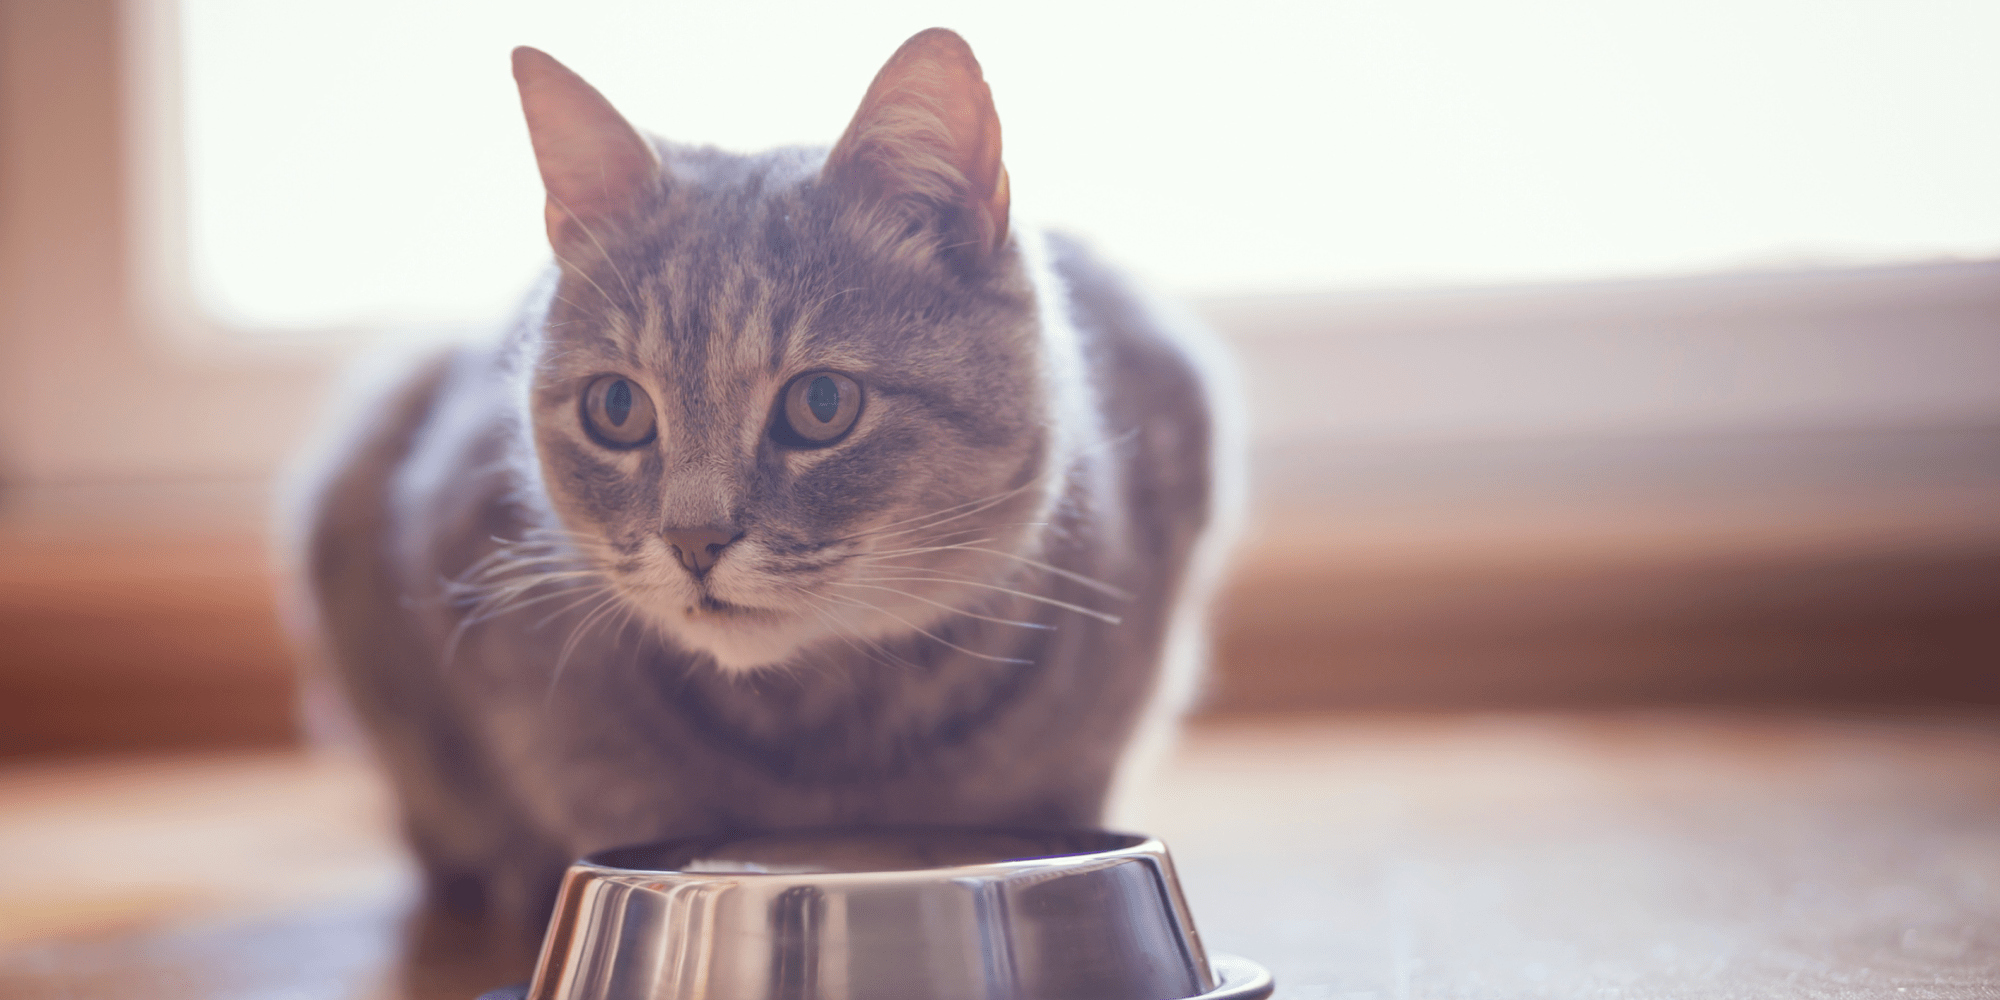 A photo of a cat sitting by a water bowl